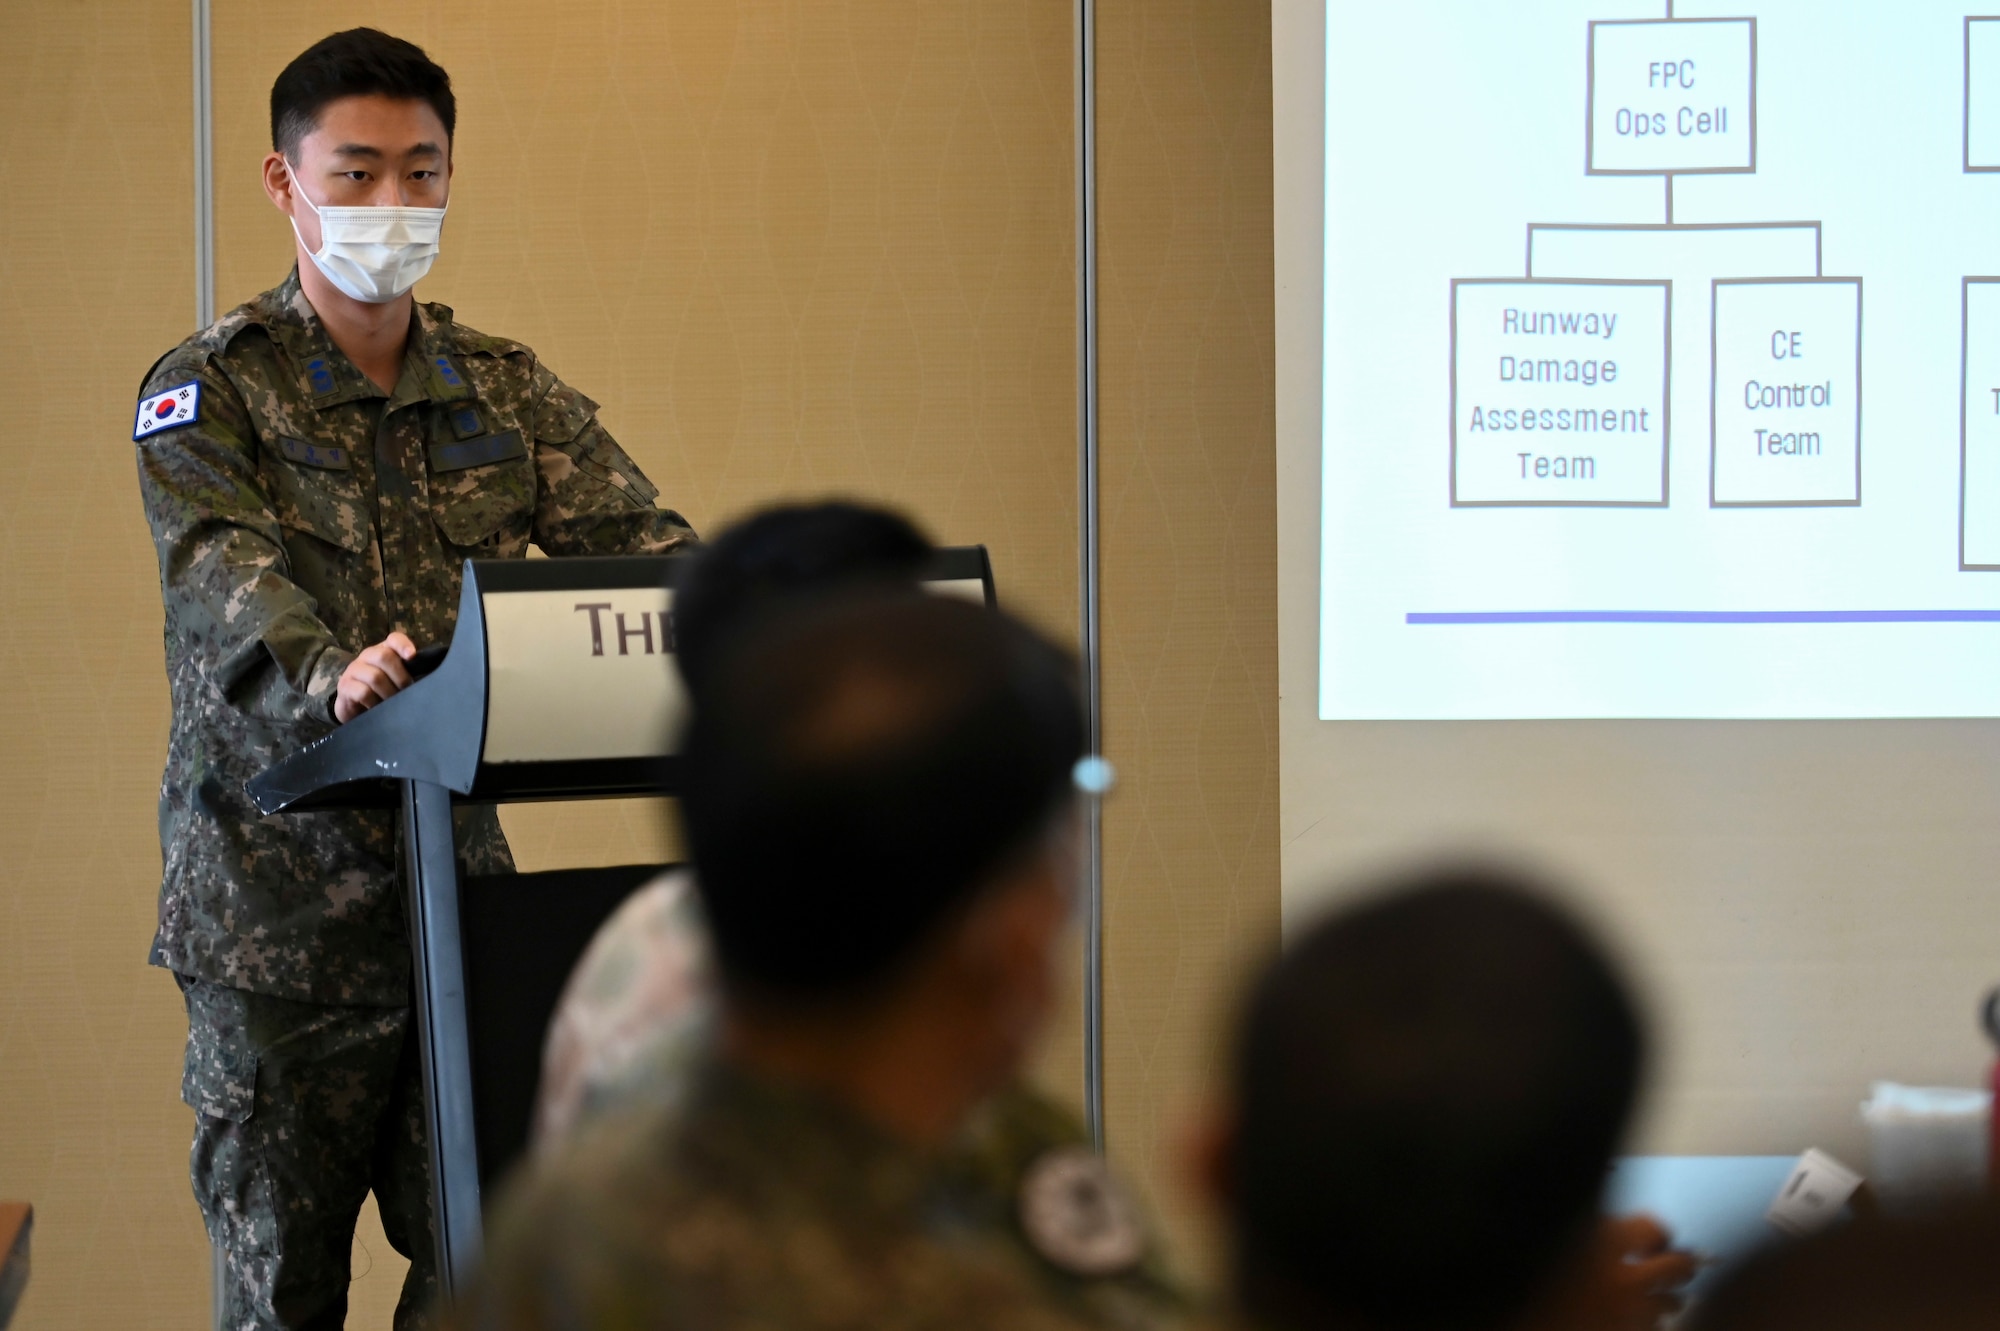 A member from the Republic of South Korea Air Force gives a briefing during the Pacific Unity Multi-Lateral Civil Engineer Key Leader Engagement, June 24, 2022 at Andersen Air Force Base, Guam. Themes during this KLE included topics of shared interest across the allies and partners such as joint capabilities, leveraging expertise in the Total Force, and increased frequency of subject matter expert exchanges and multi-lateral training. (U.S. Air Force photo by Airman 1st Class Emily Saxton)